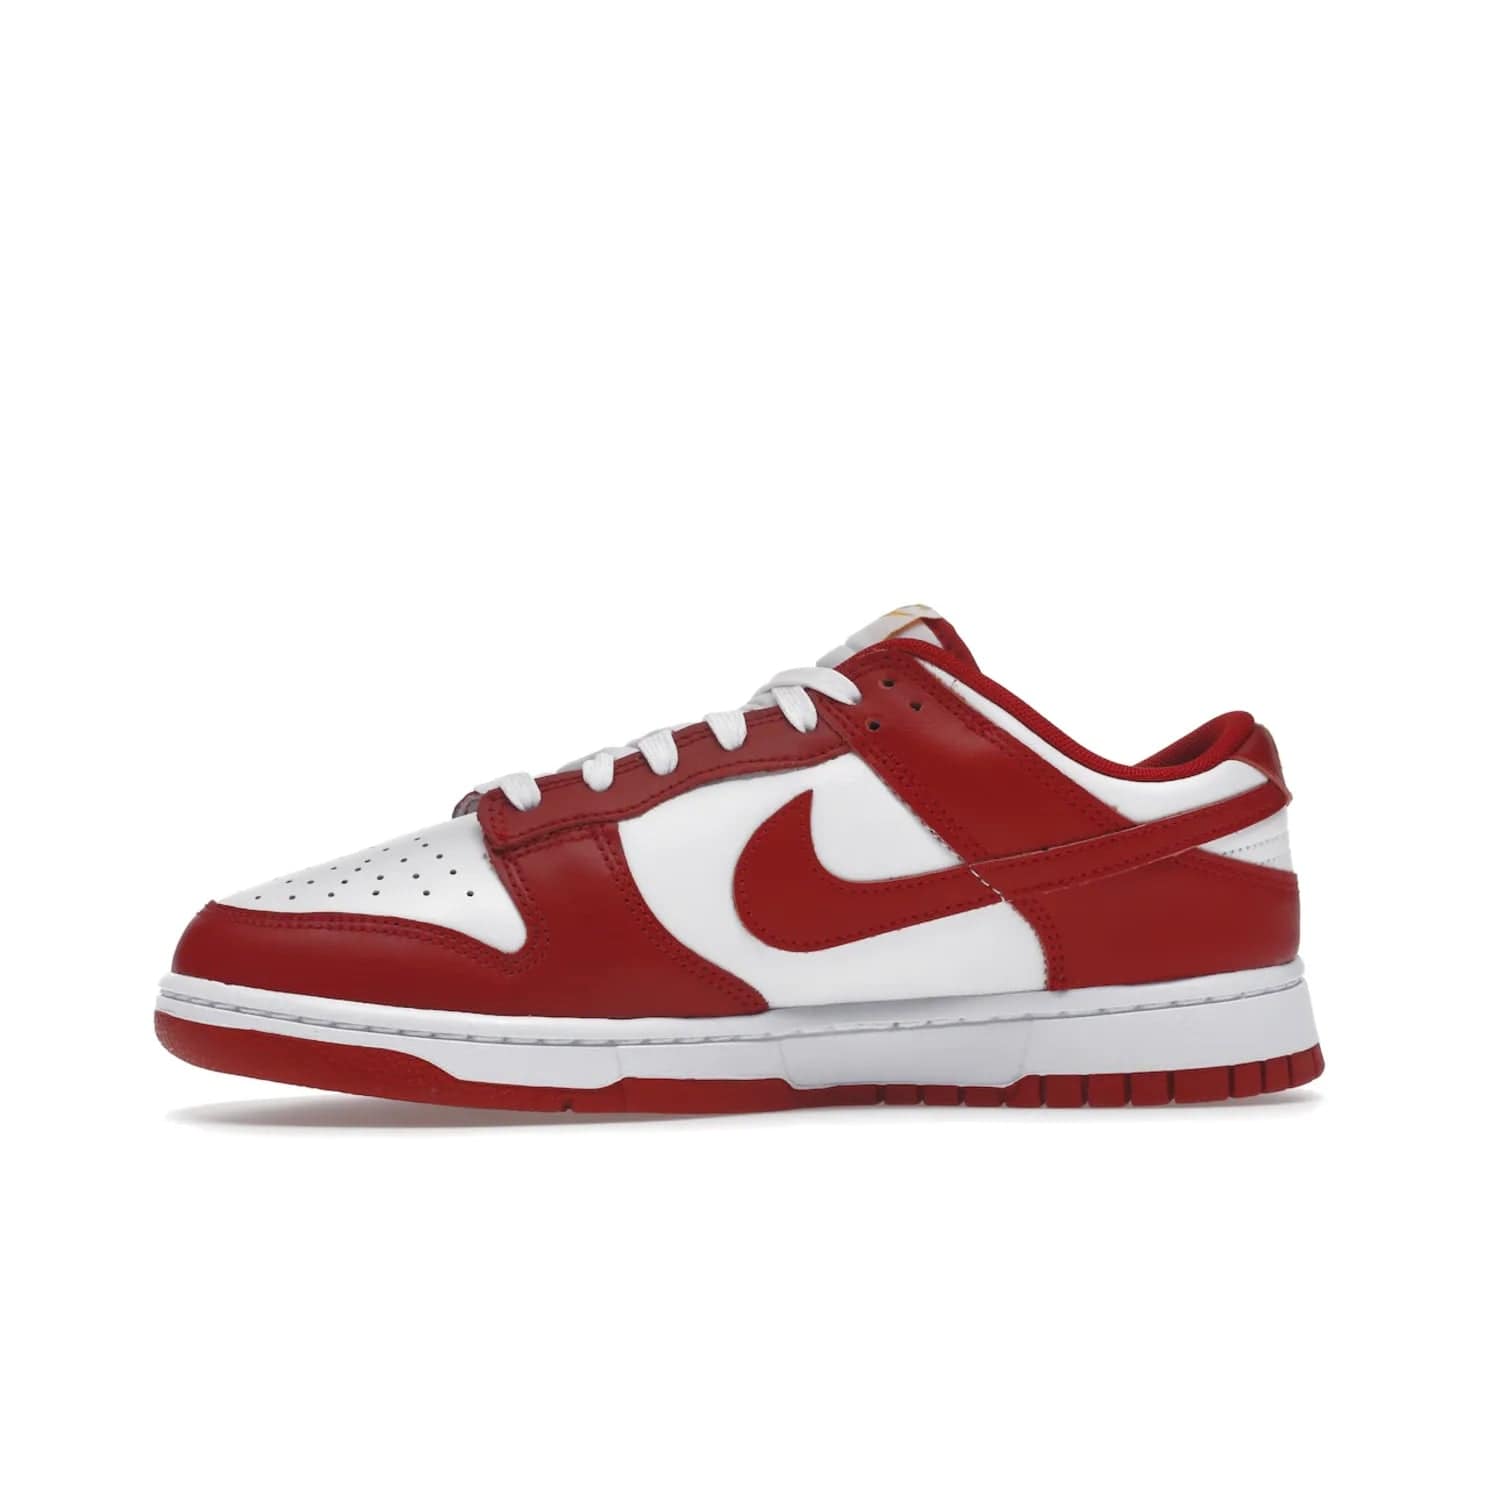 Nike Dunk Low USC - Image 18 - Only at www.BallersClubKickz.com - The Nike Dunk Low USC DD1391-602 colorway captures the eye of University of Southern California fans. Crafted with leather and rubber upper and outsole, this stylish sneaker features a white, gym red, and yellow colorway. With yellow Nike branding, white perforated vamp, and red suede Swoosh, this sneaker turns heads. Get the classic Nike Dunk Low USC releasing on November 9th, 2022.